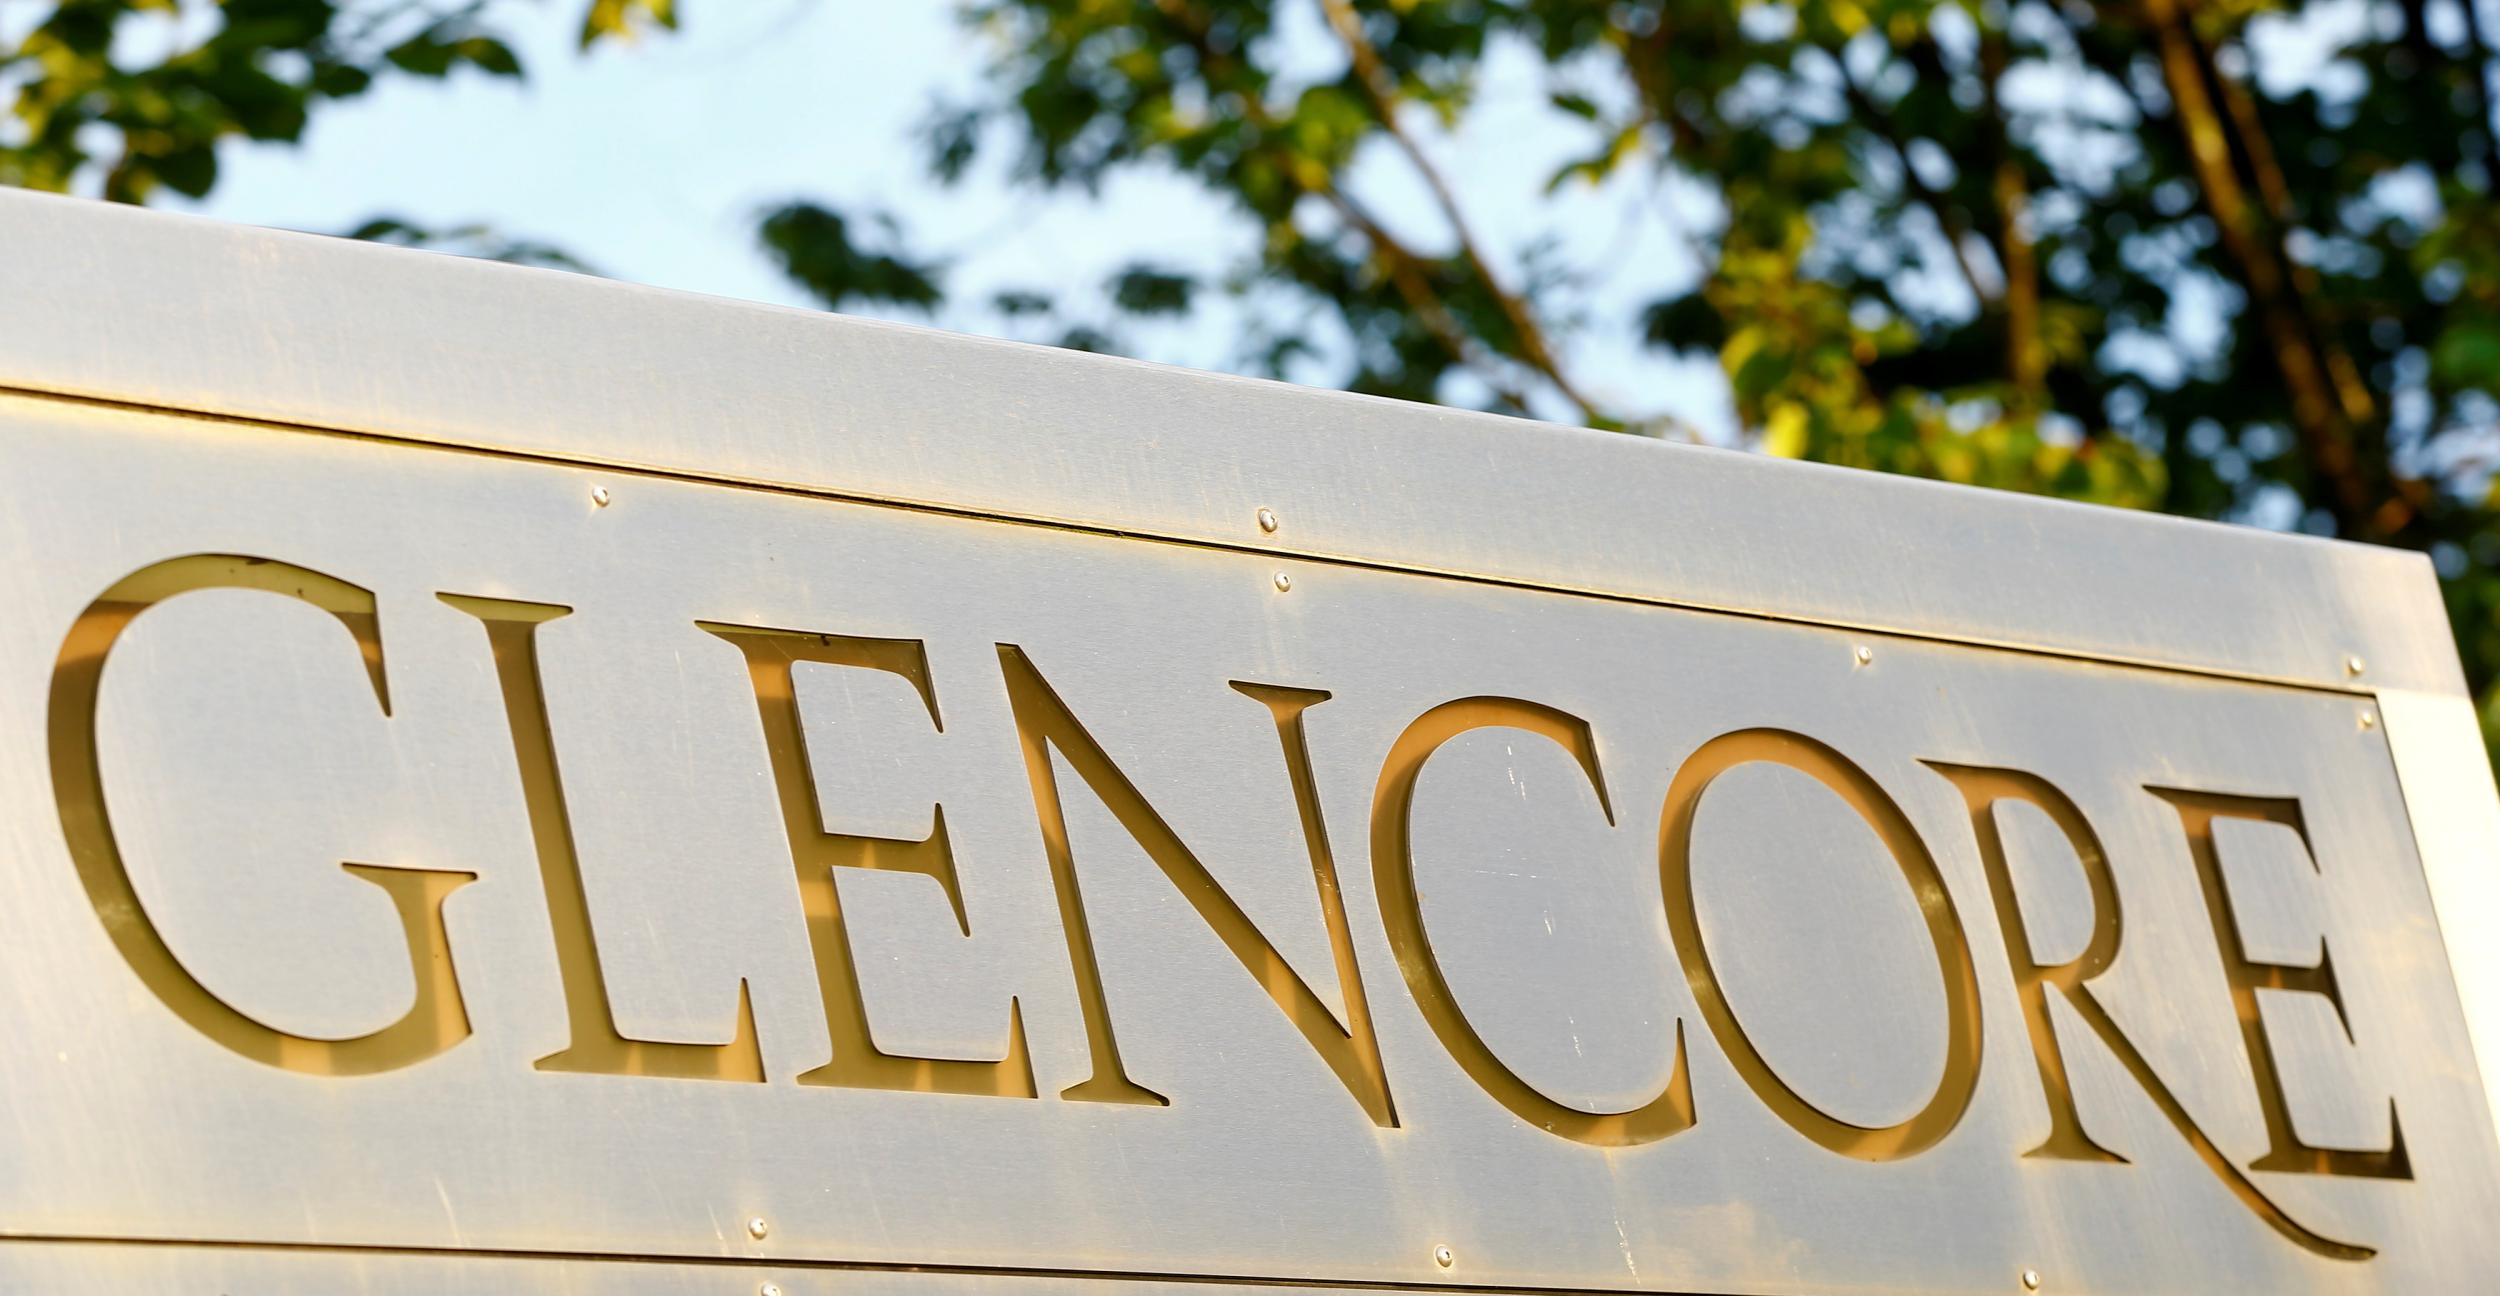 Glencore Hails Strongest Full Year Results After Commodity Markets Boost The Independent The